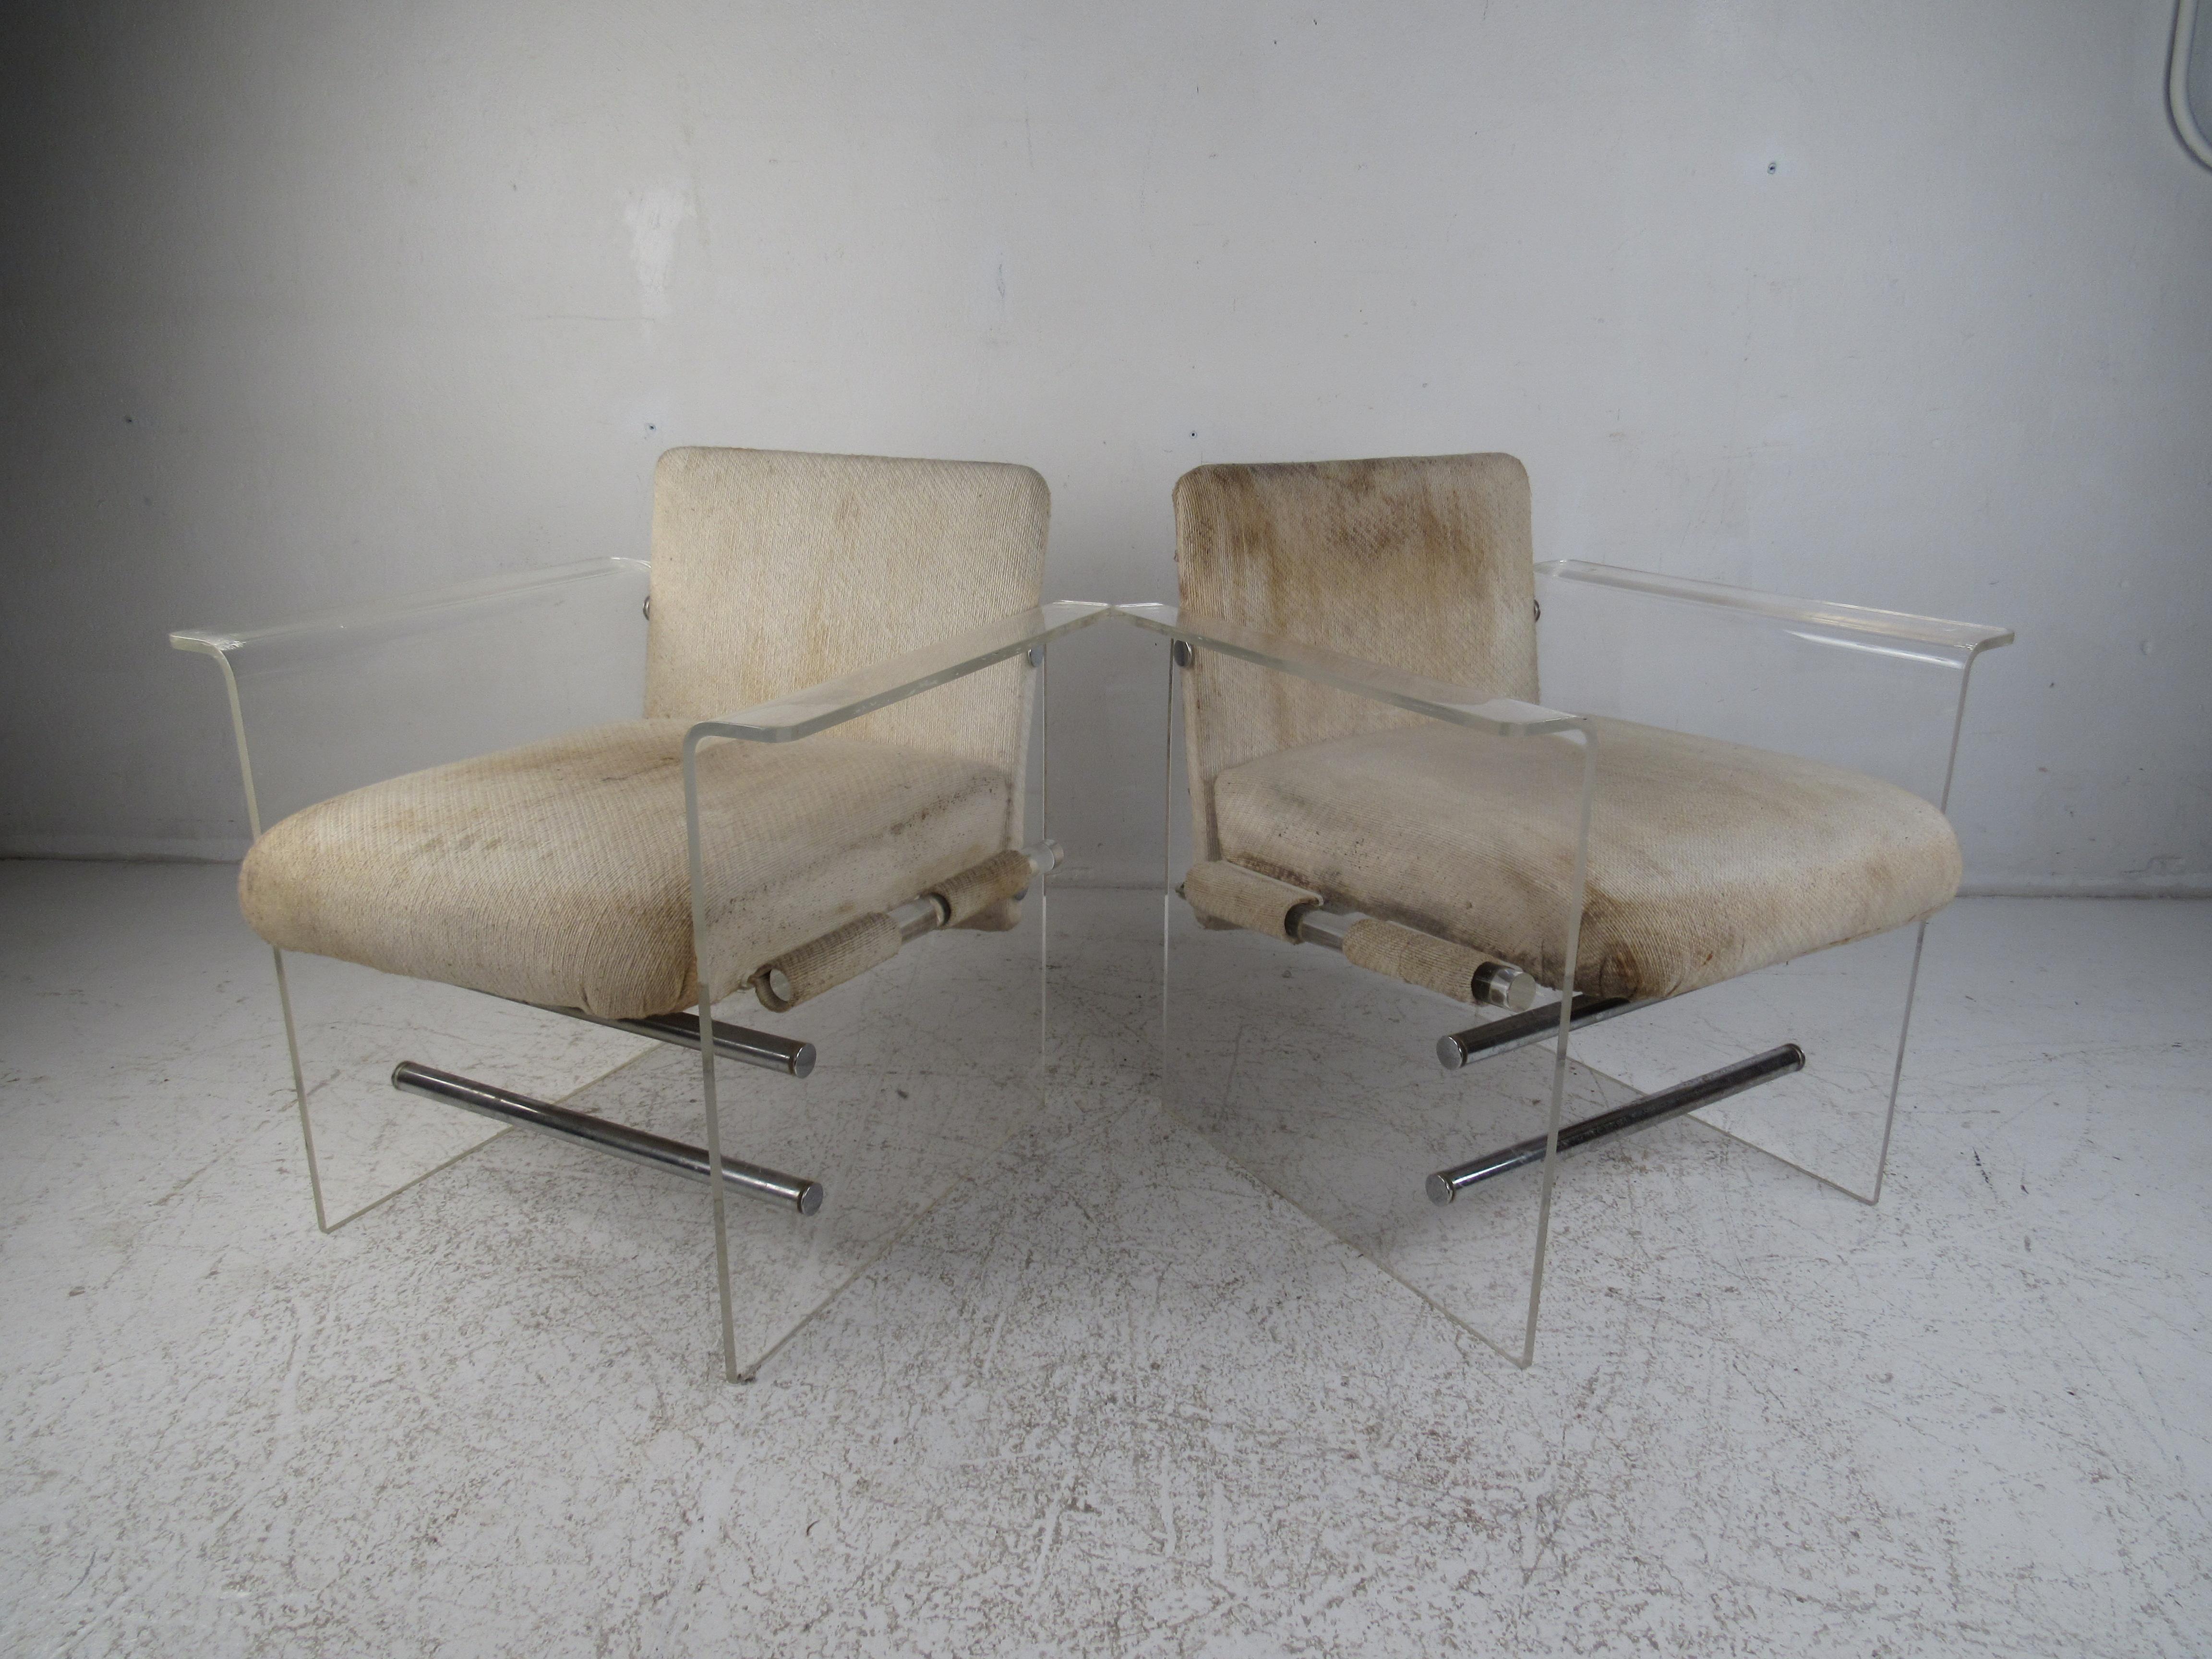 An unusual pair of vintage modern lounge chairs that feature Lucite sides connected by chrome cylindrical stretchers. The sleek design allows for the Lucite sides to function as a base and unique winged arm rests. This Pace style pair of arm chairs